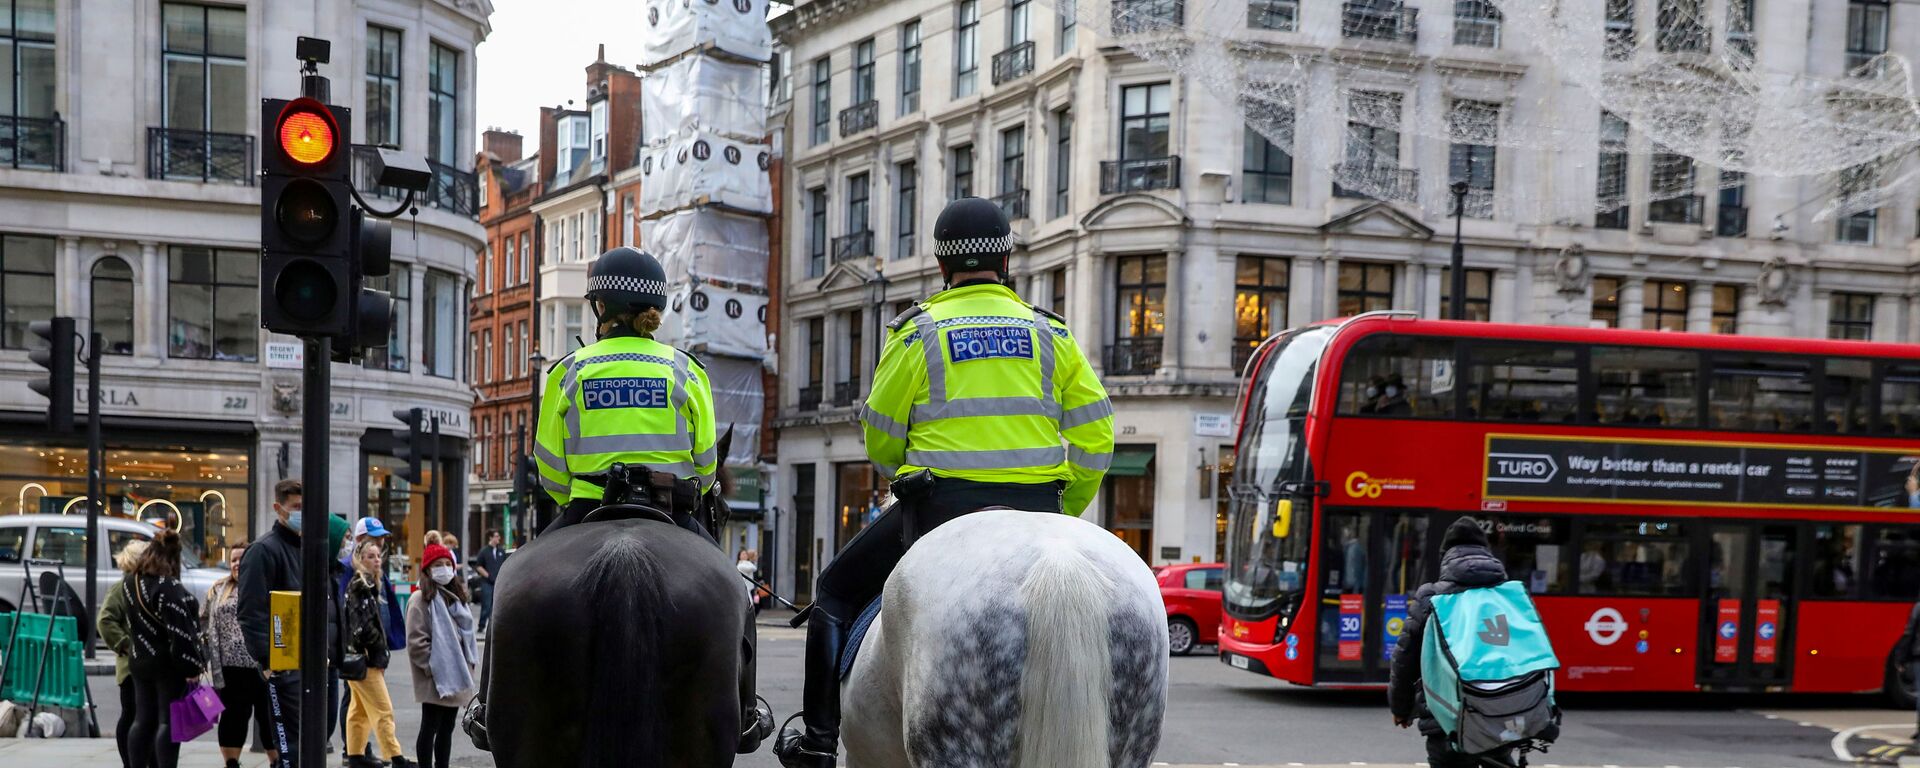 FILE PHOTO: Mounted police and a Deliveroo rider wait at a red light at Regent Street, one of London's main shopping streets, a day after a new lockdown was announced during the coronavirus disease (COVID-19) outbreak in London, Britain November 1, 2020 - Sputnik International, 1920, 04.03.2021